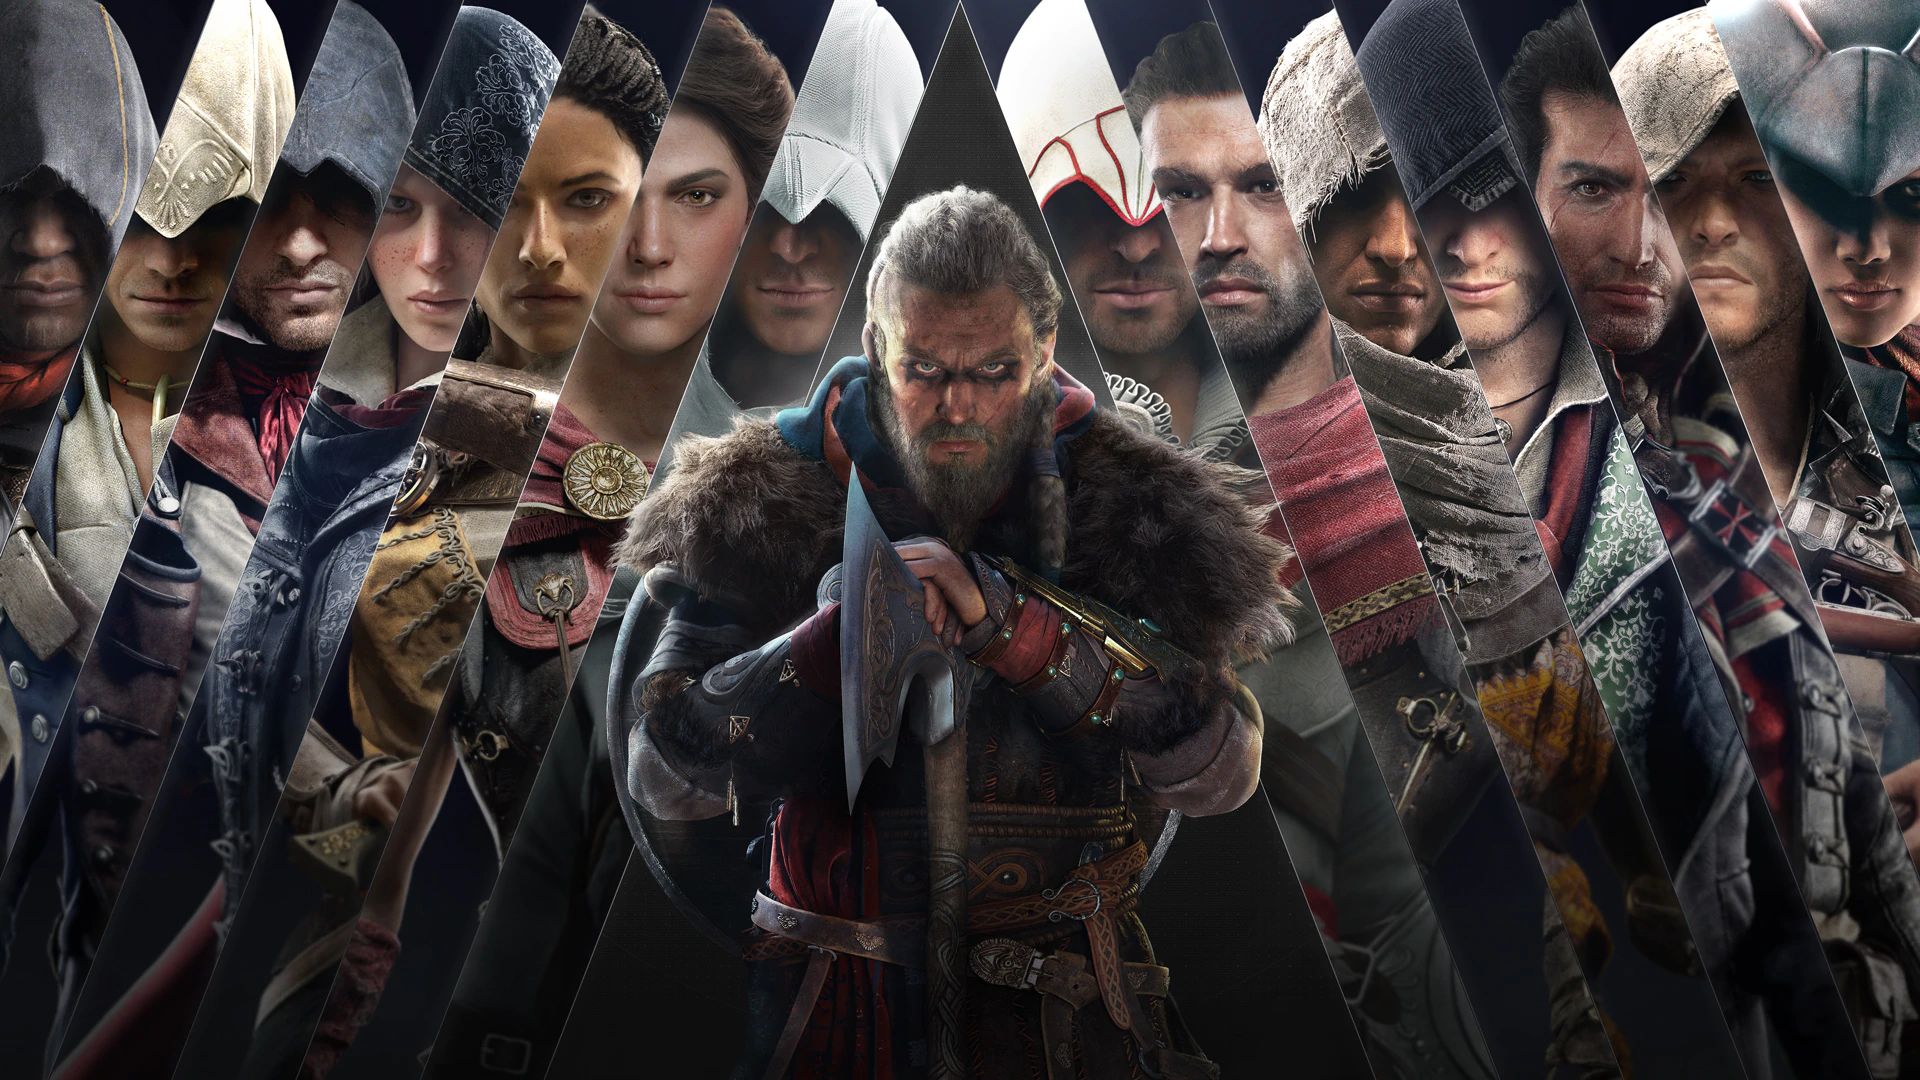 Image for Ubisoft is experimenting with “standalone multiplayer experiences” for Assassin’s Creed